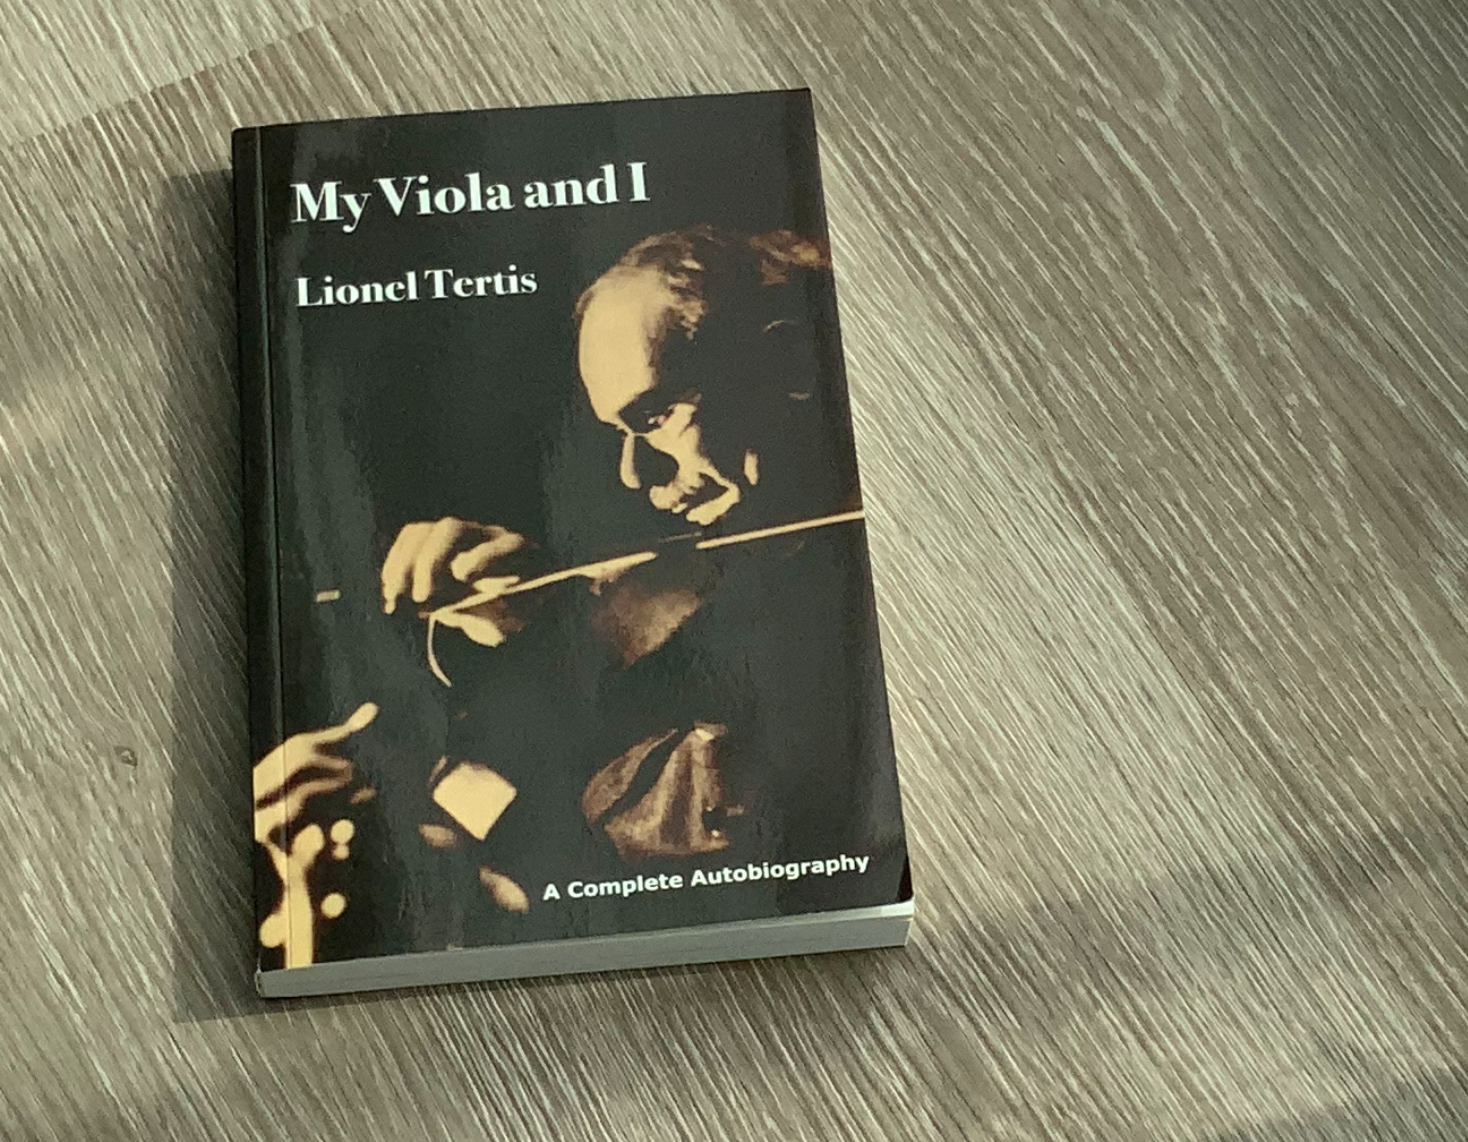 Lionel Tertis' autobiography, My Viola and I